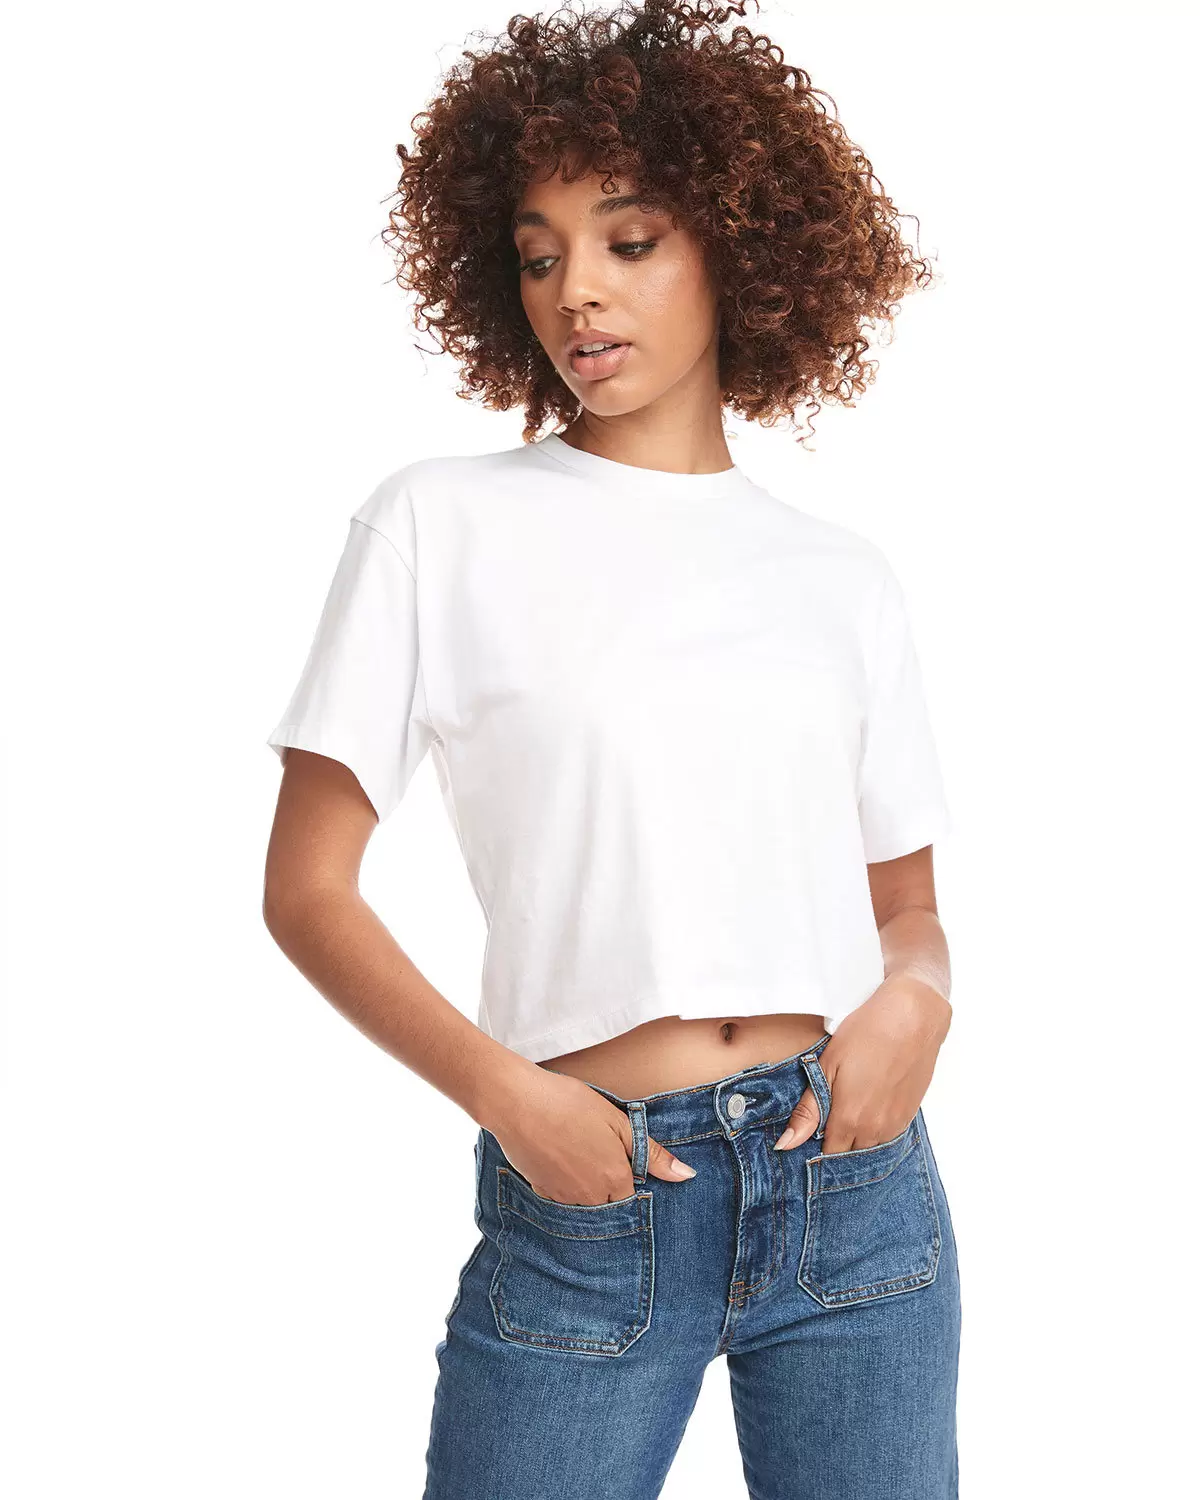 Next Level 1580 Womens Wholesale Crop Top T Shirt White - From $4.86